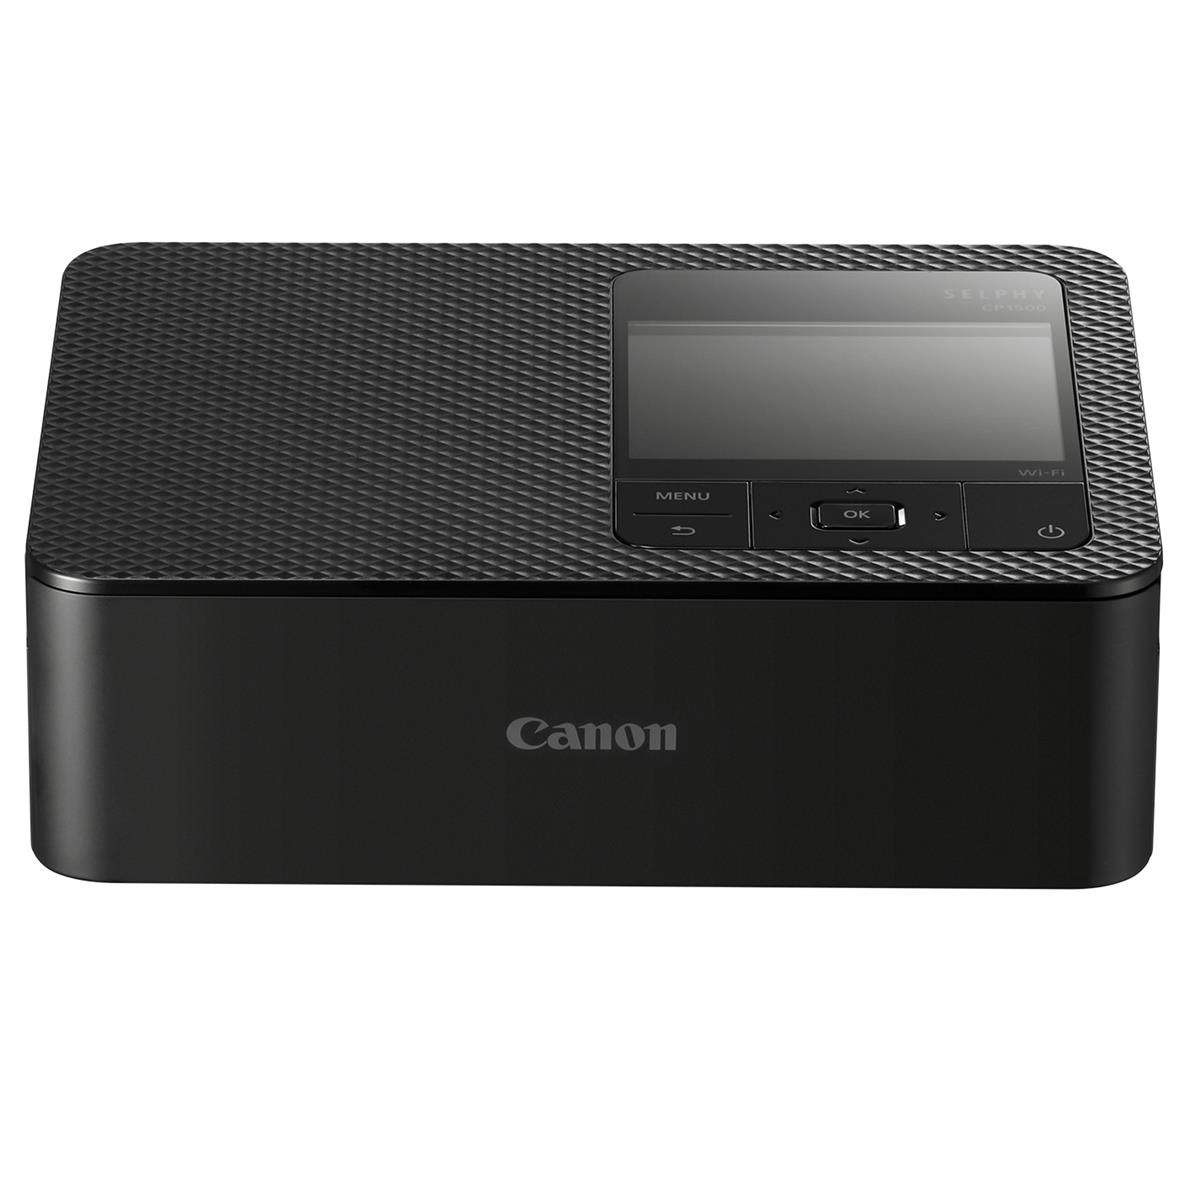 Image of Canon SELPHY CP1500 Wireless Compact Photo Printer